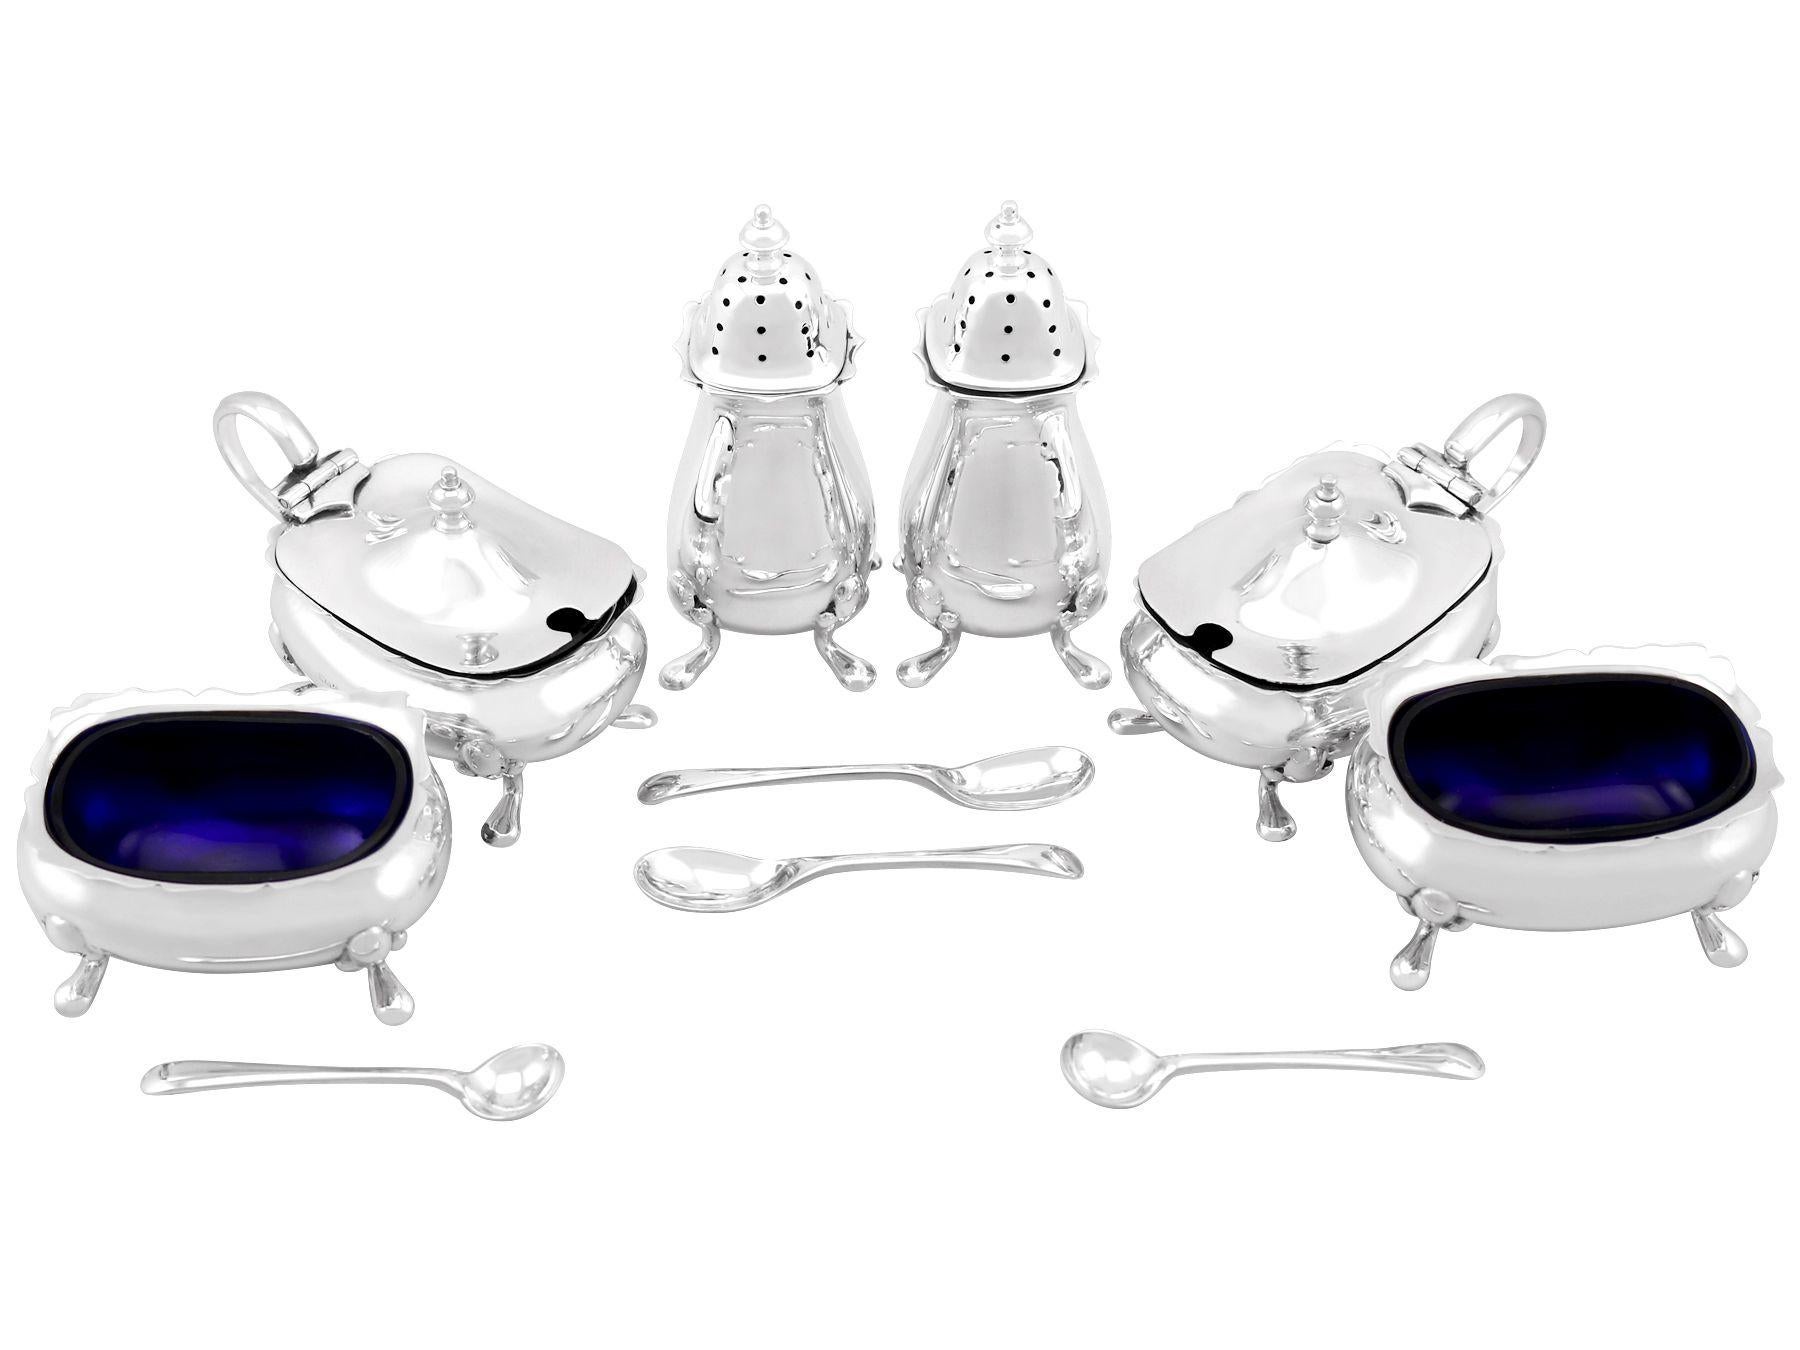 An exceptional, fine and impressive antique George V English sterling silver six piece condiment set - boxed; an addition to our dining silverware collection.

This exceptional antique George V six piece sterling silver condiment set consists of